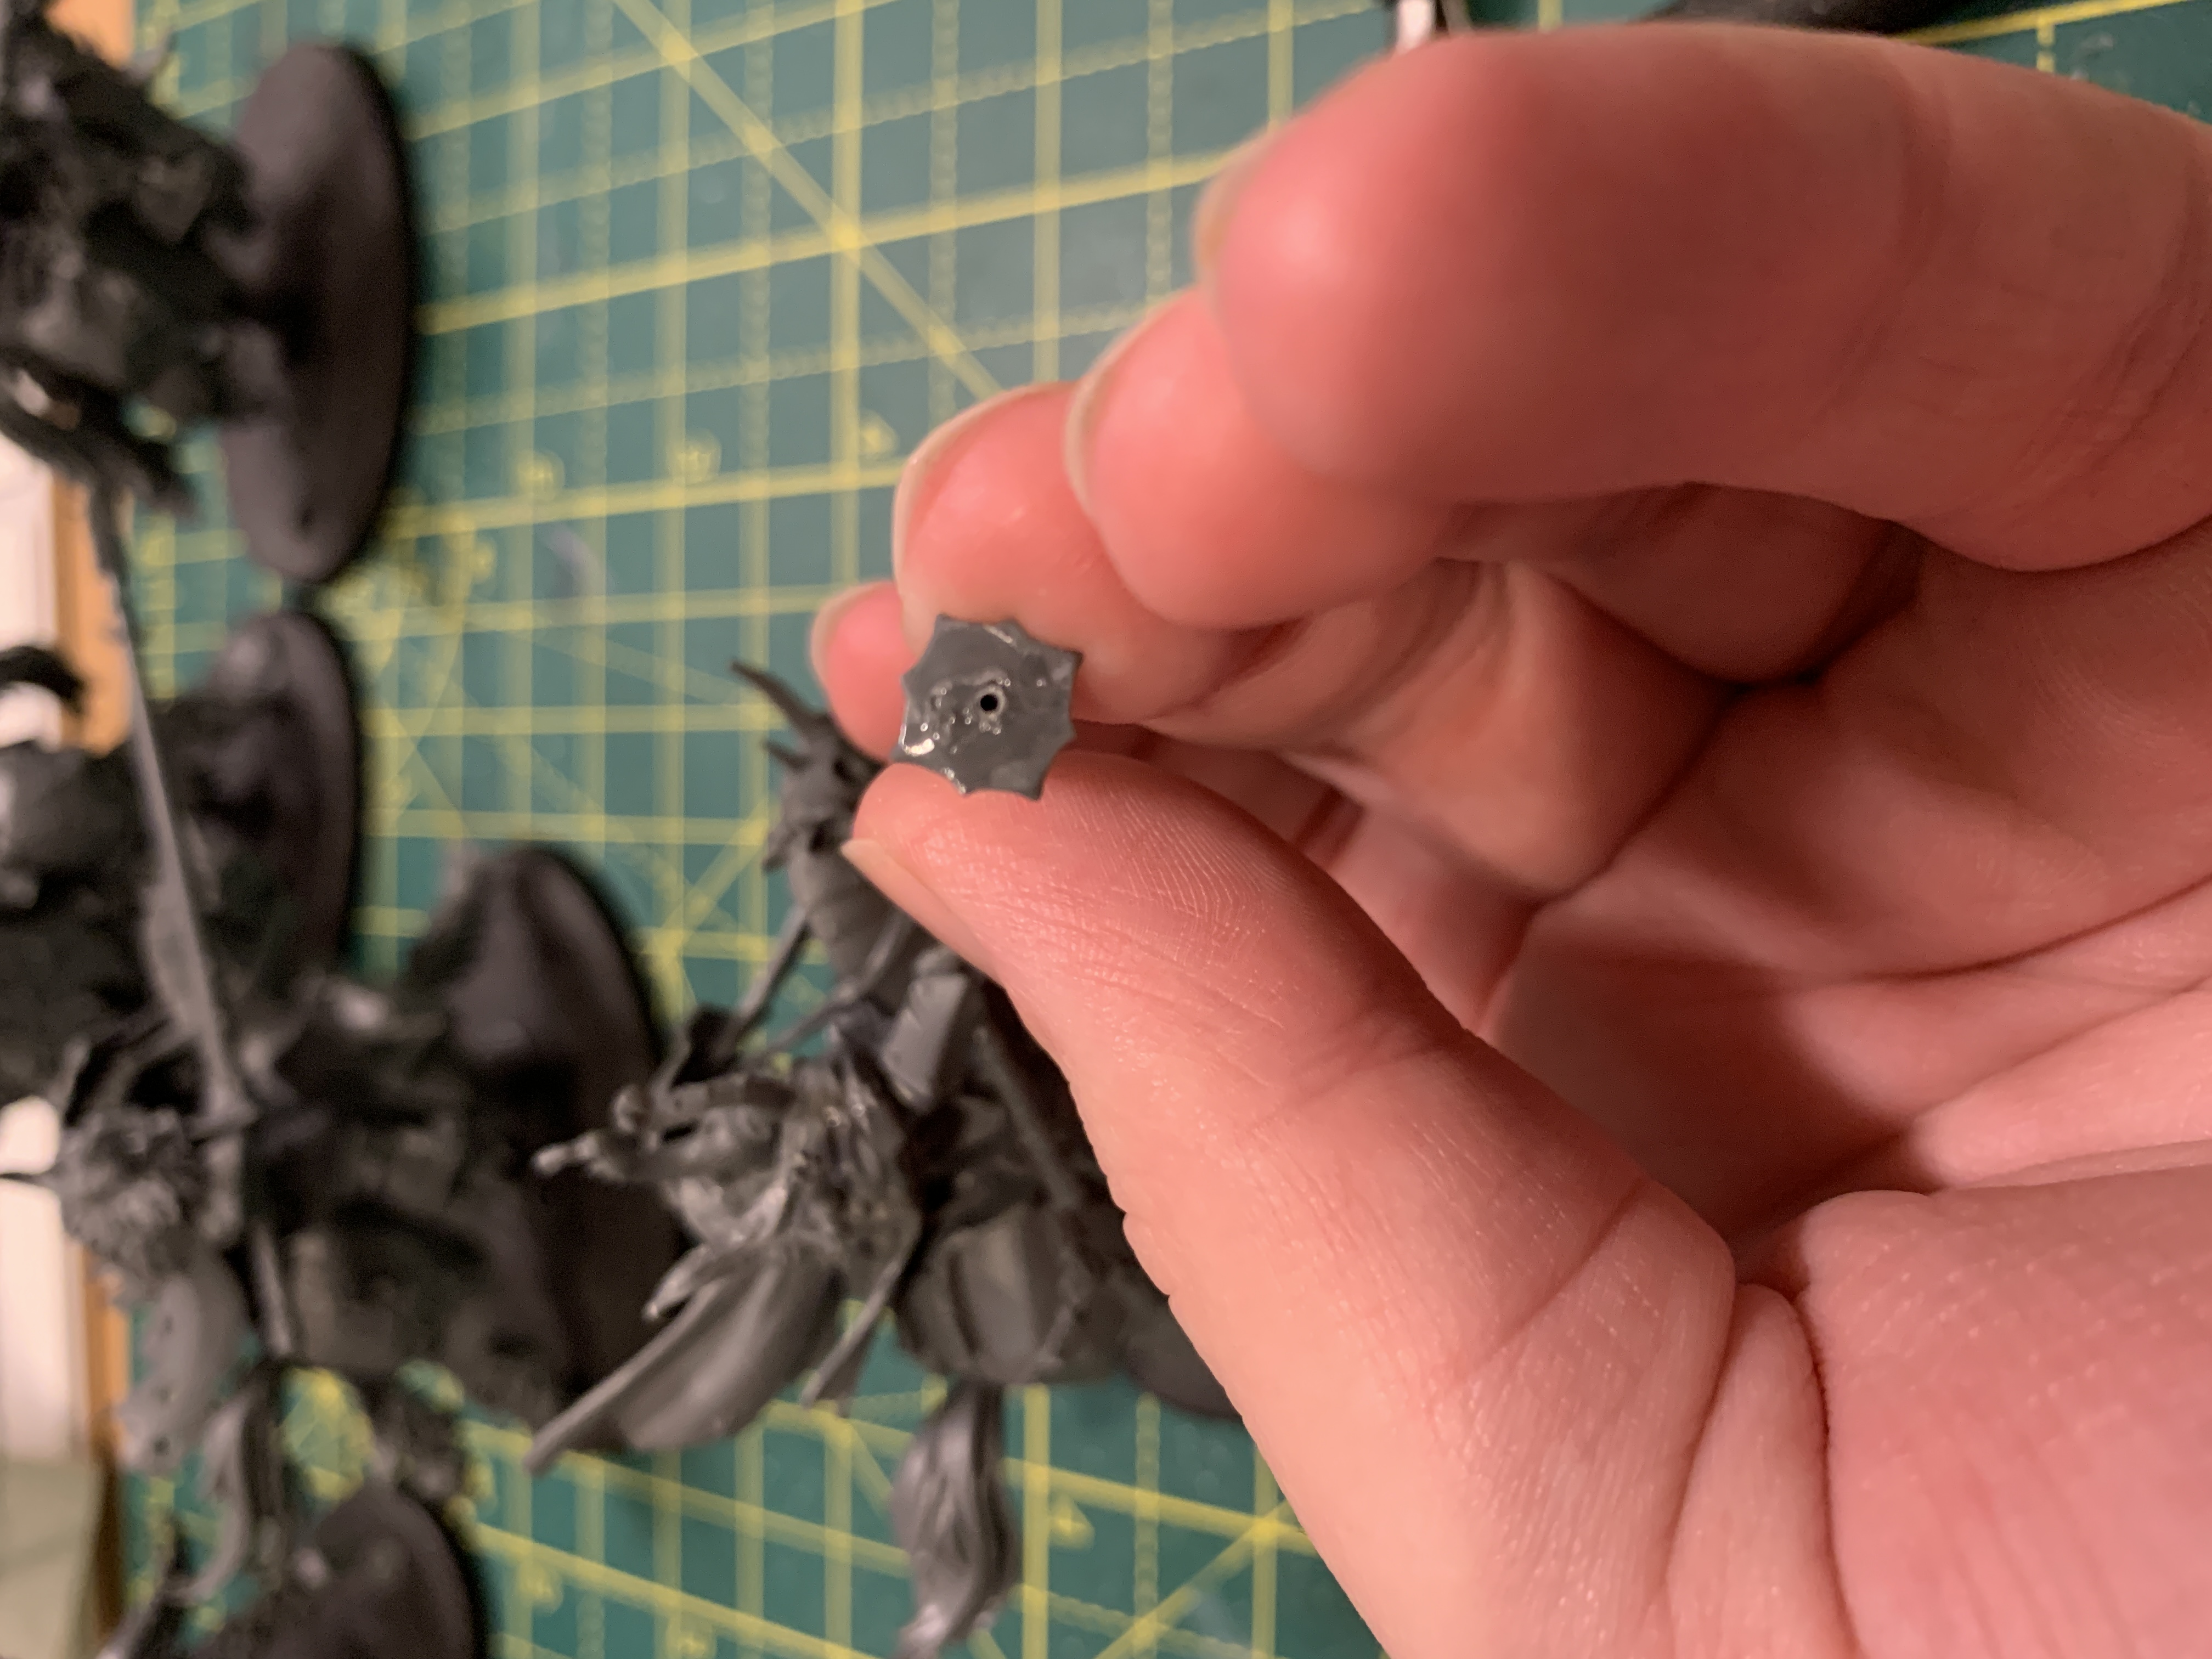 Me holding a Slaves to Darkness Chaos Knight lance with the tip facing away from the camera showing the 0.7mm hole I've just drilled to pin it to the model. In the background is a green and yellow cutting mat and several other models